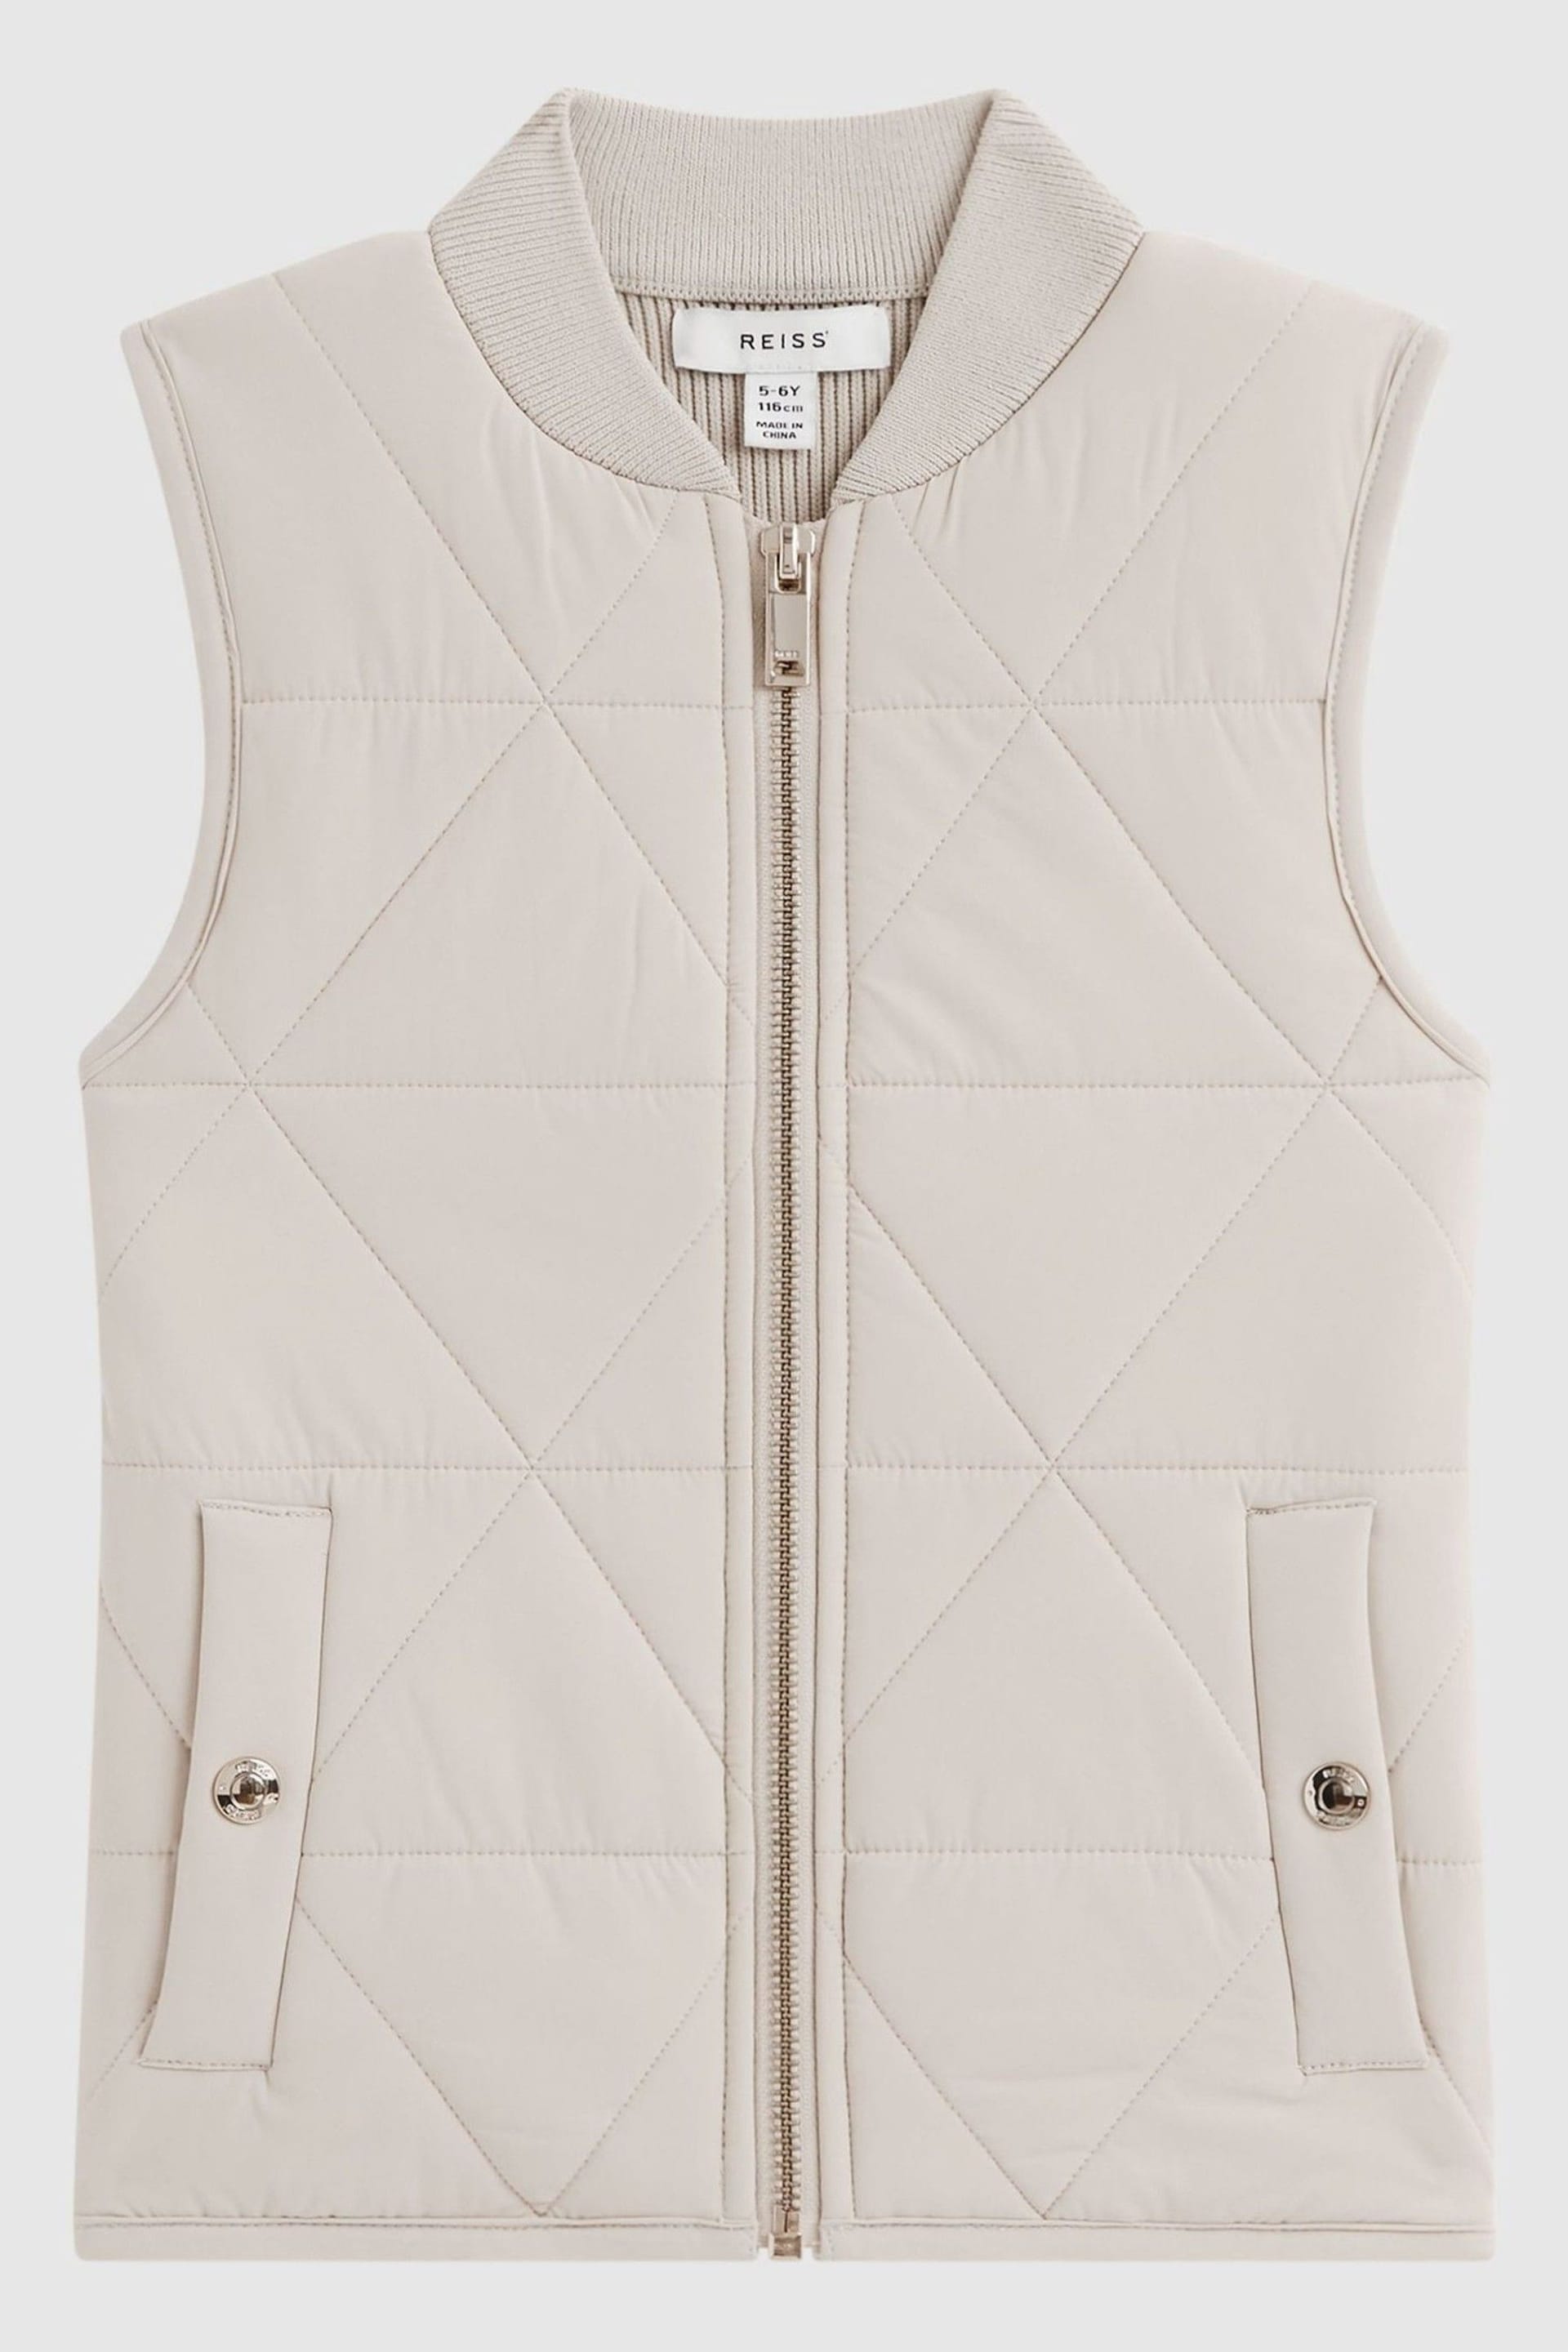 Reiss Stone Ritchie Senior Hybrid Knitted-Quilted Gilet - Image 2 of 5